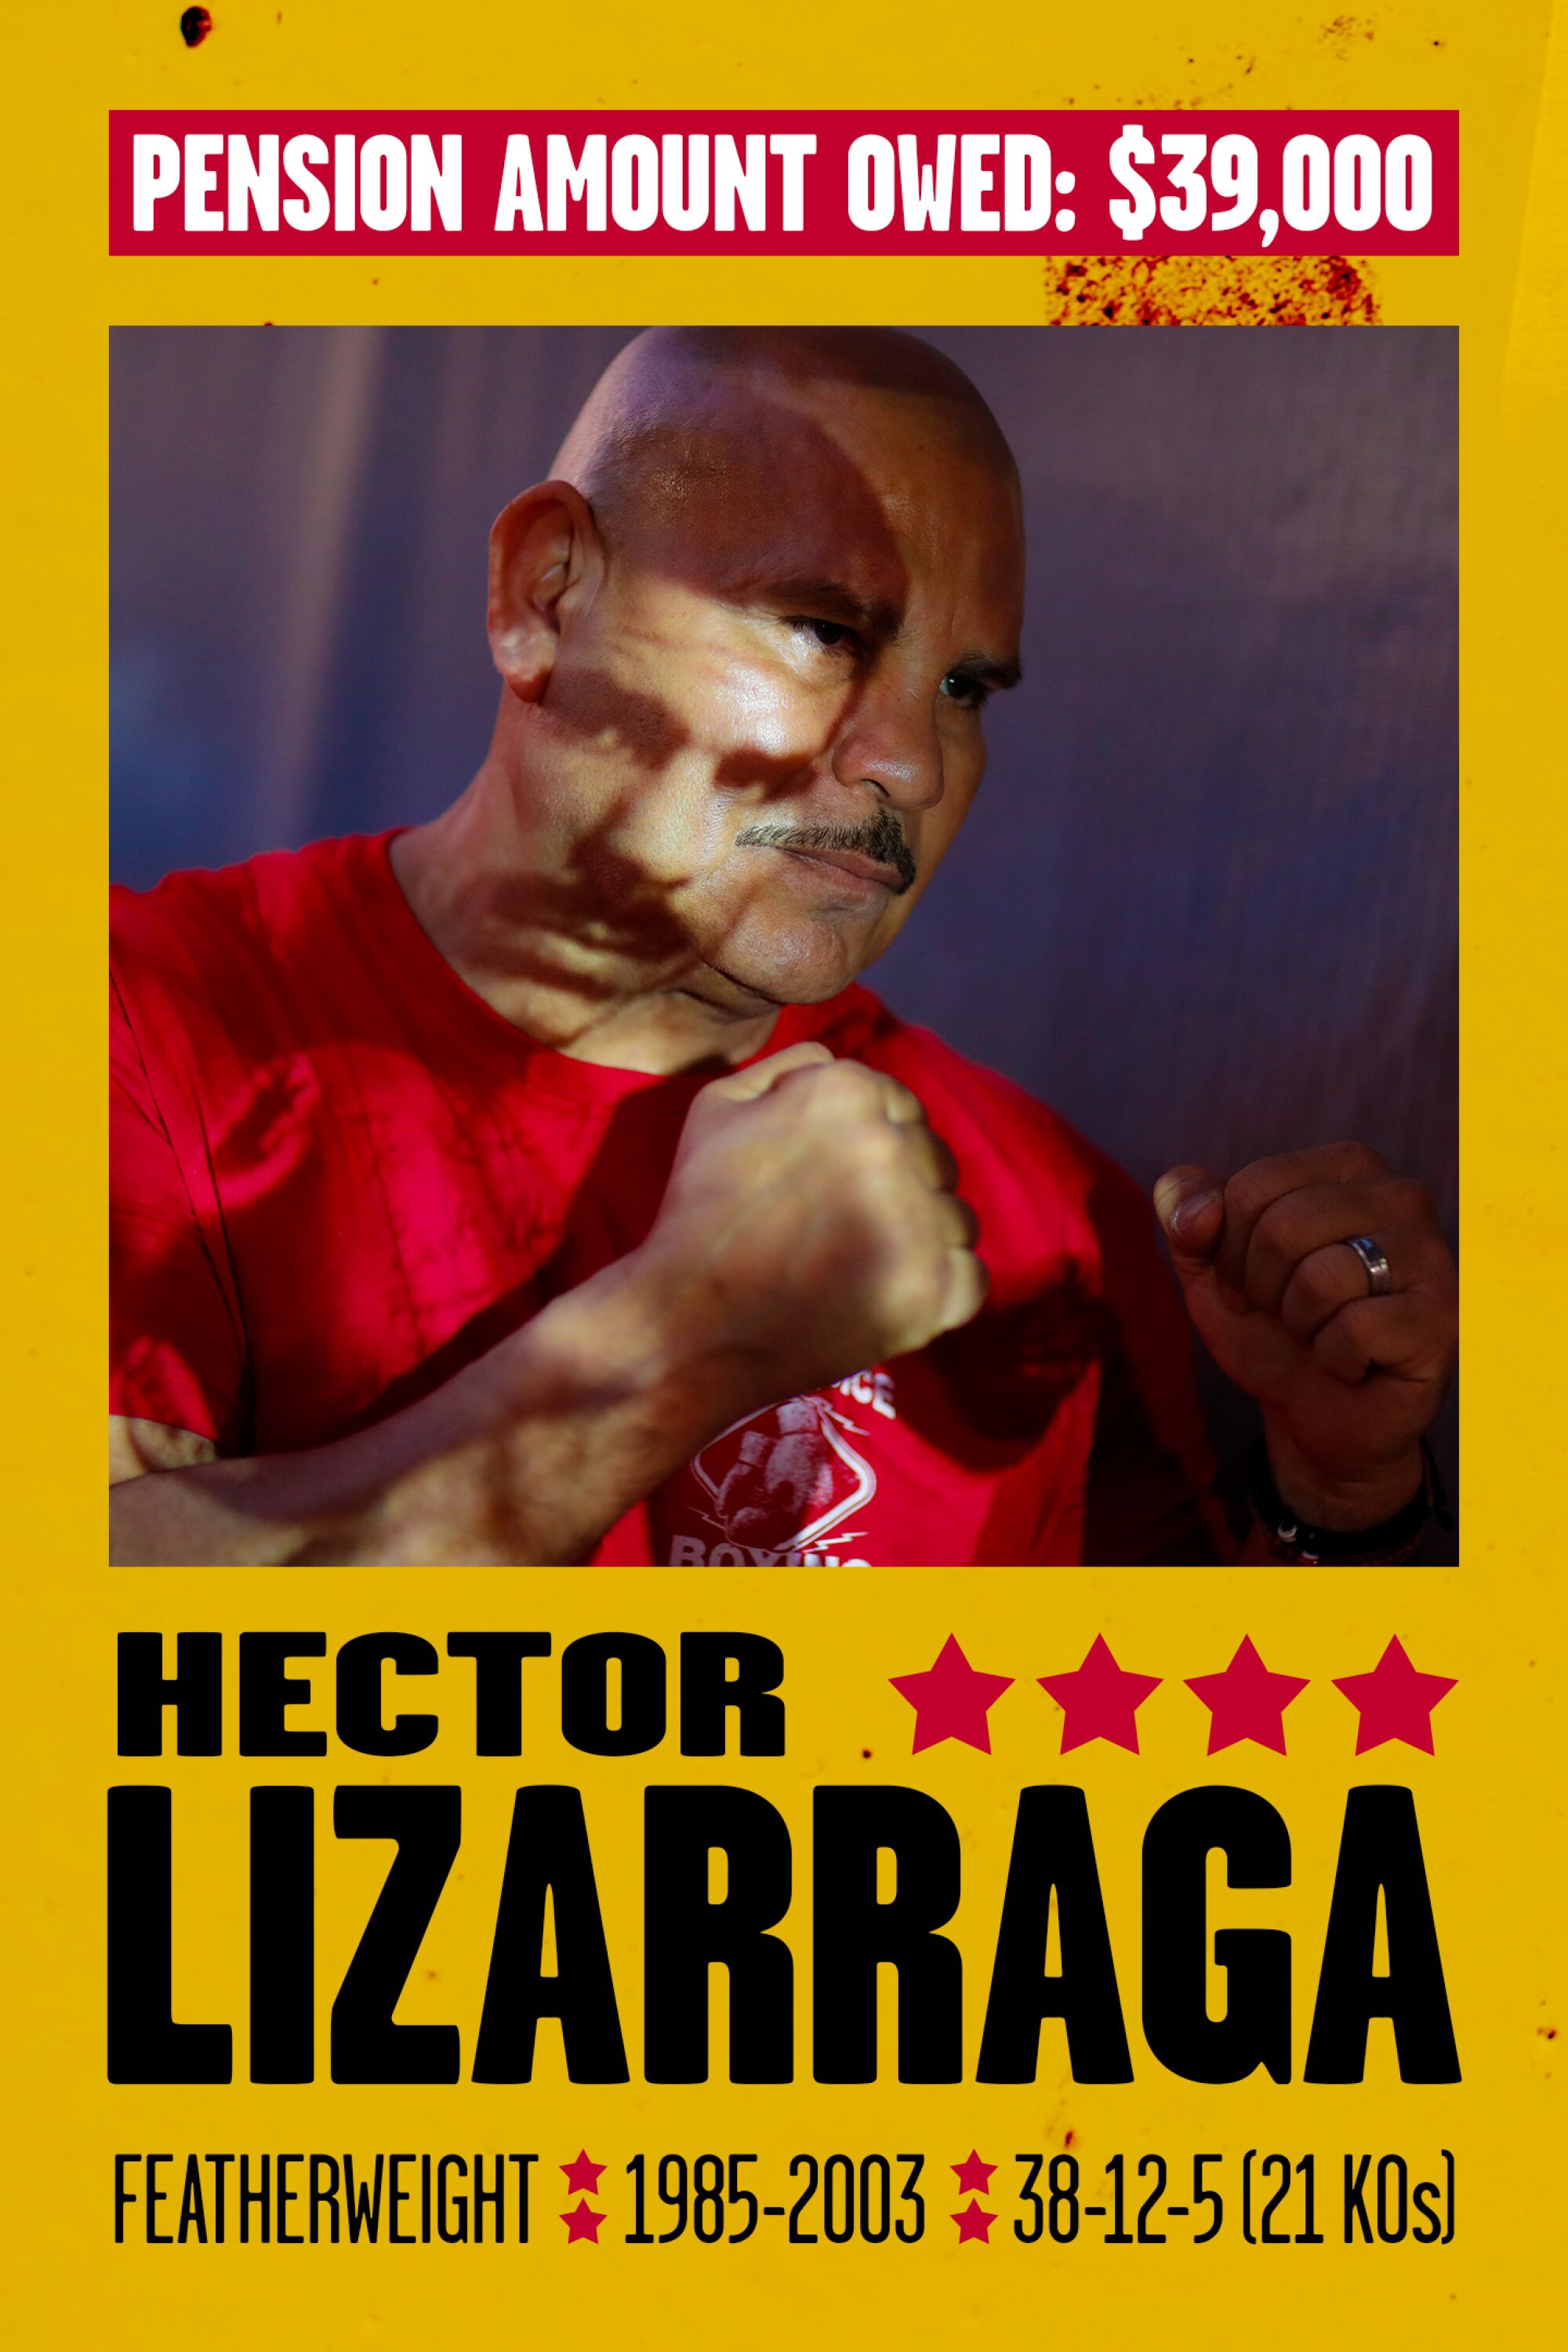 Fight poster: HECTOR LIZARRAGA, FEATHERWEIGHT, 1985-2003, 38-12-5 (21 KOs). PENSION OWED: $39,000